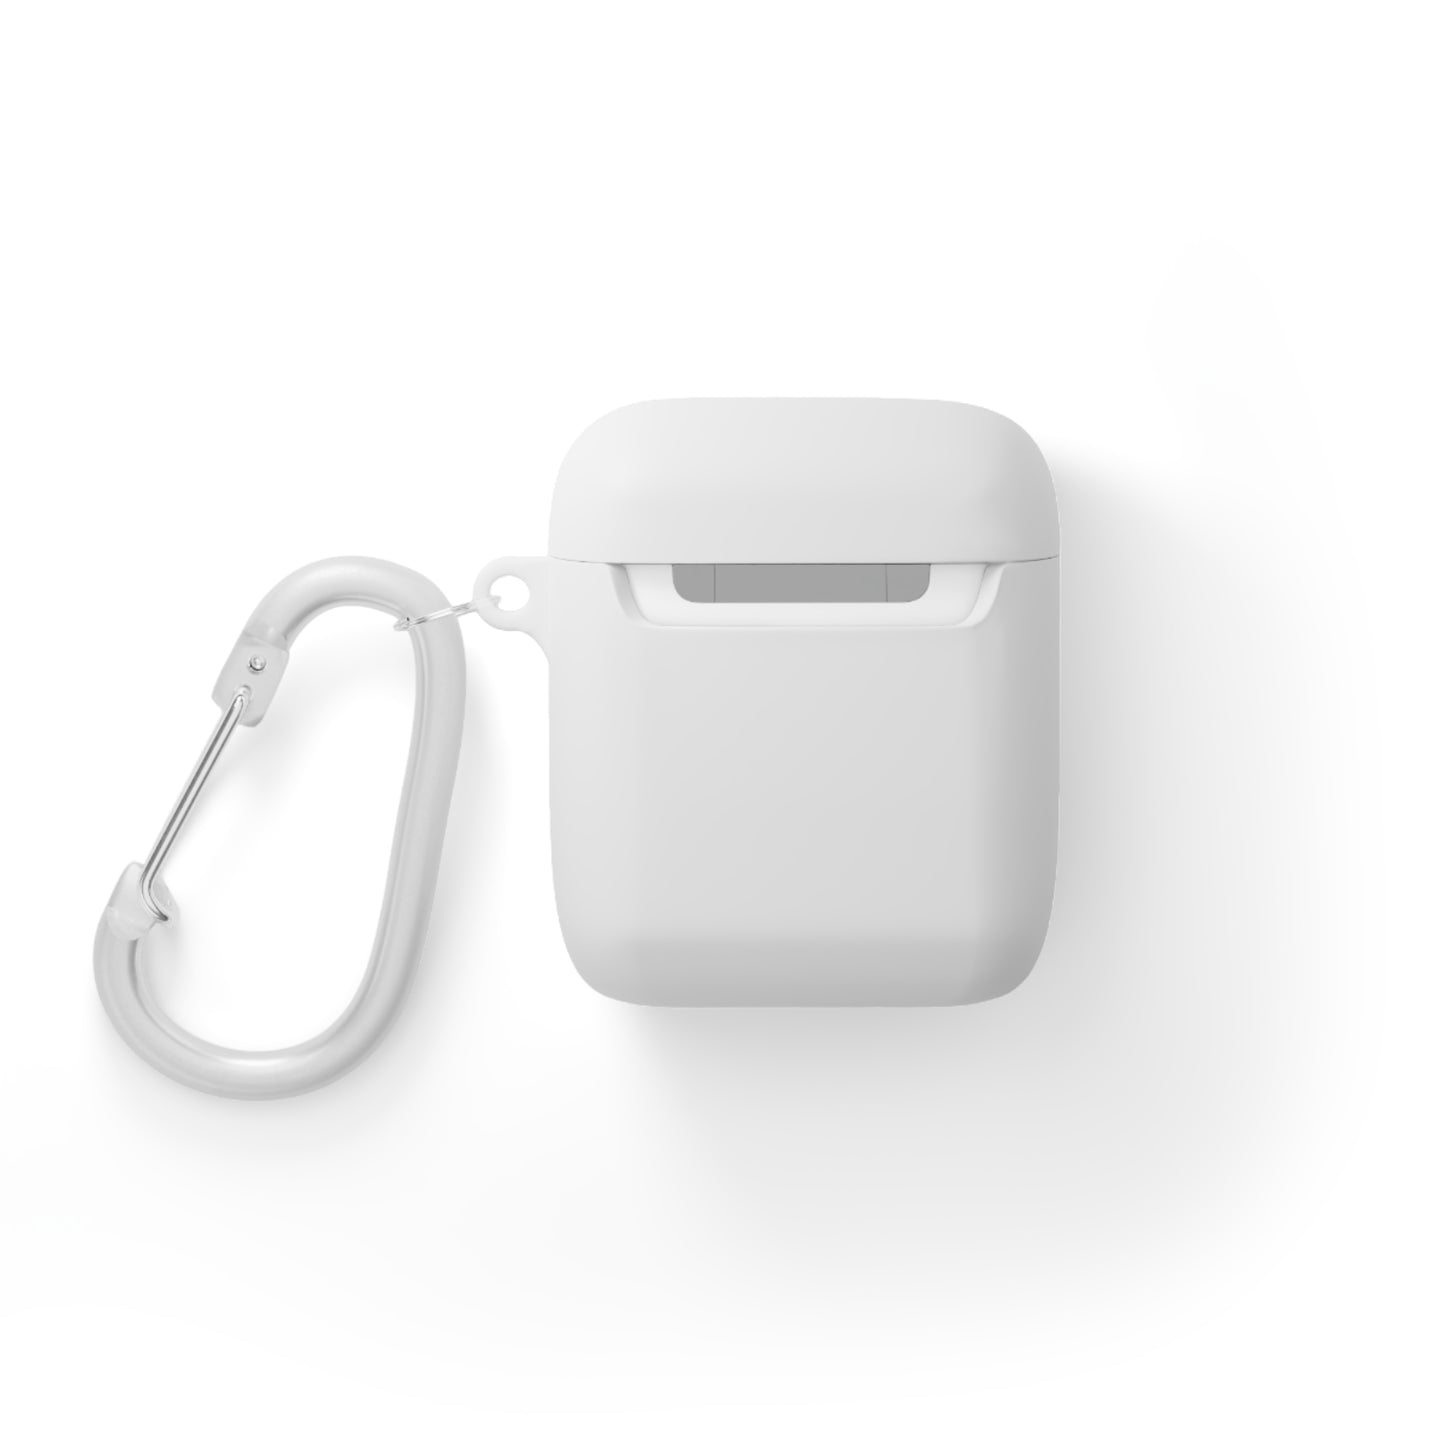 SIGPRO 2002 AirPods and AirPods Pro Case Cover